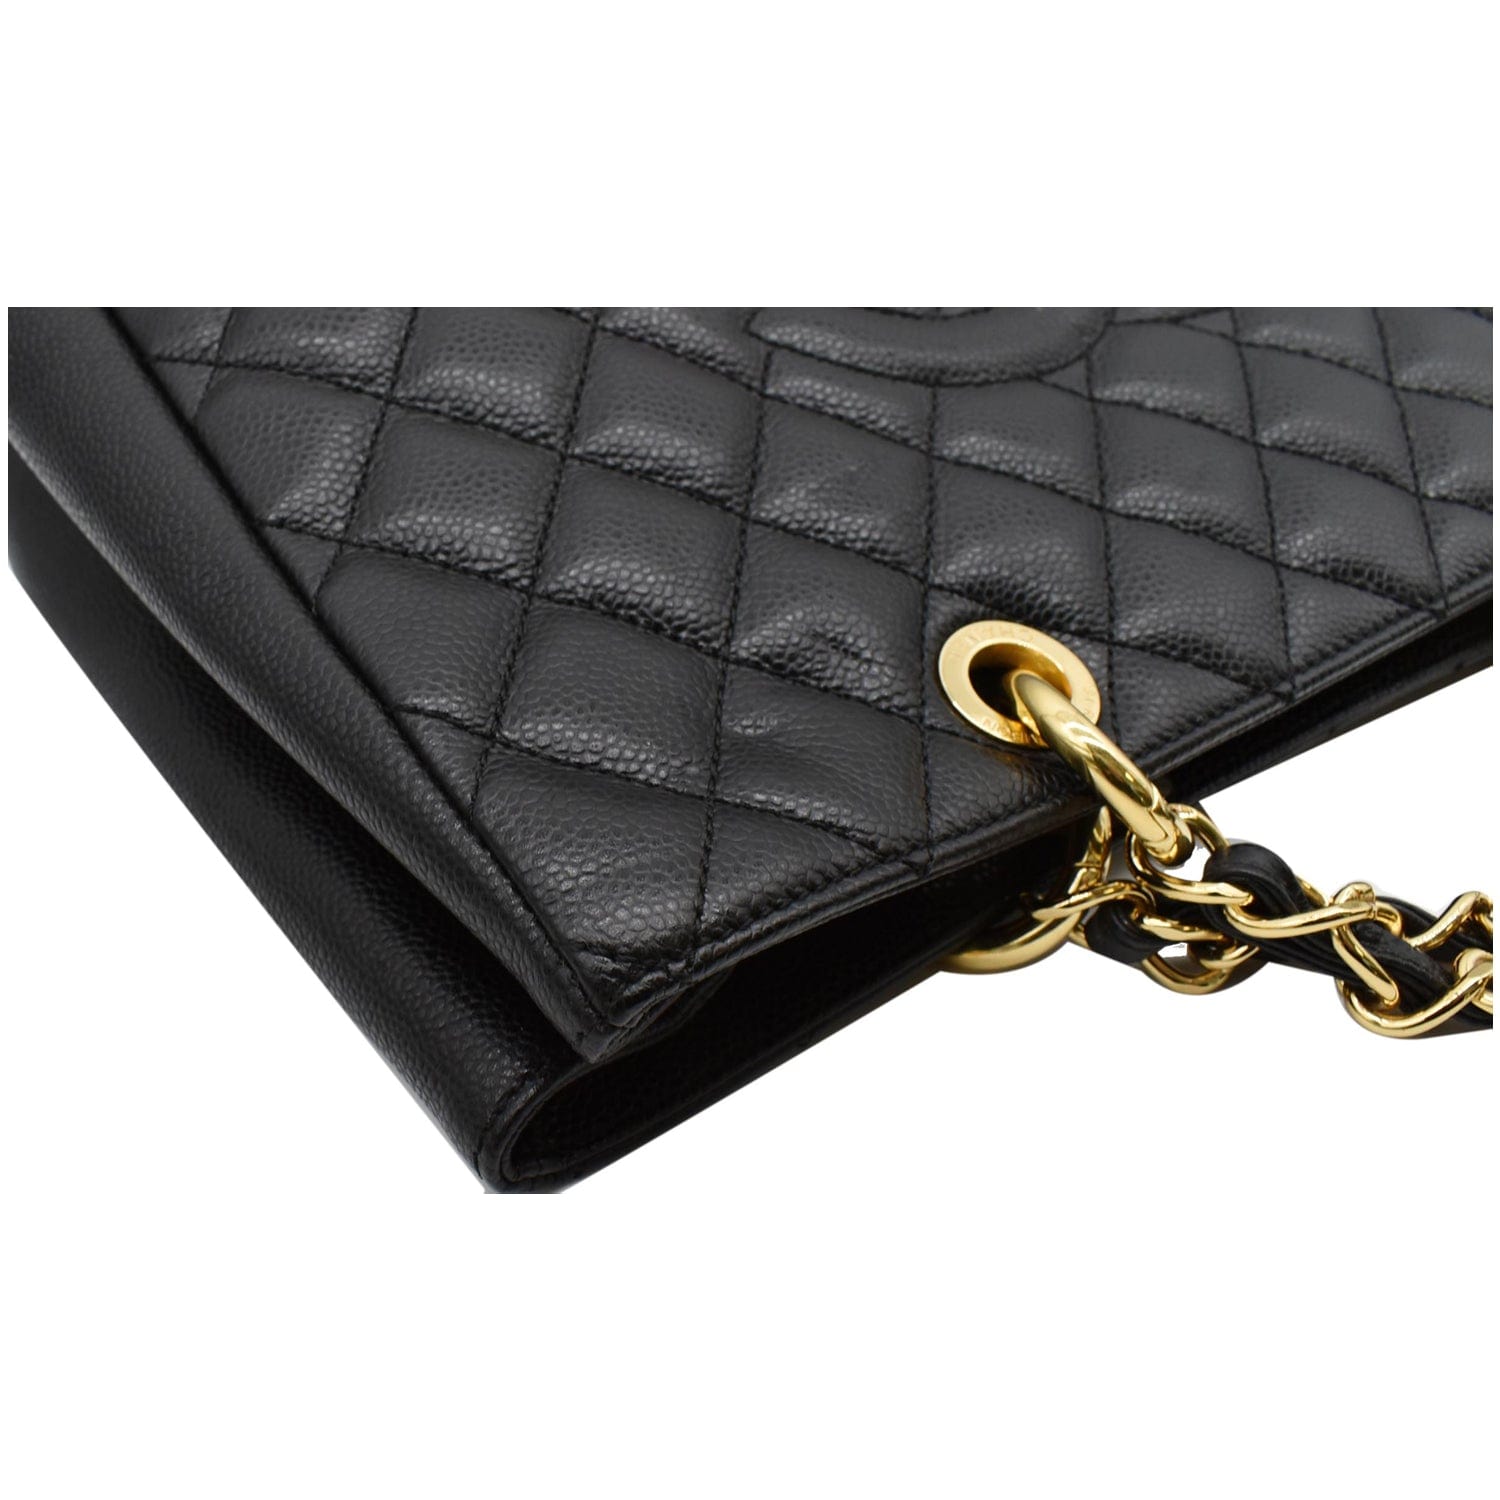 CHANEL XL Grand Quilted Caviar Leather Shopping Tote Bag Black